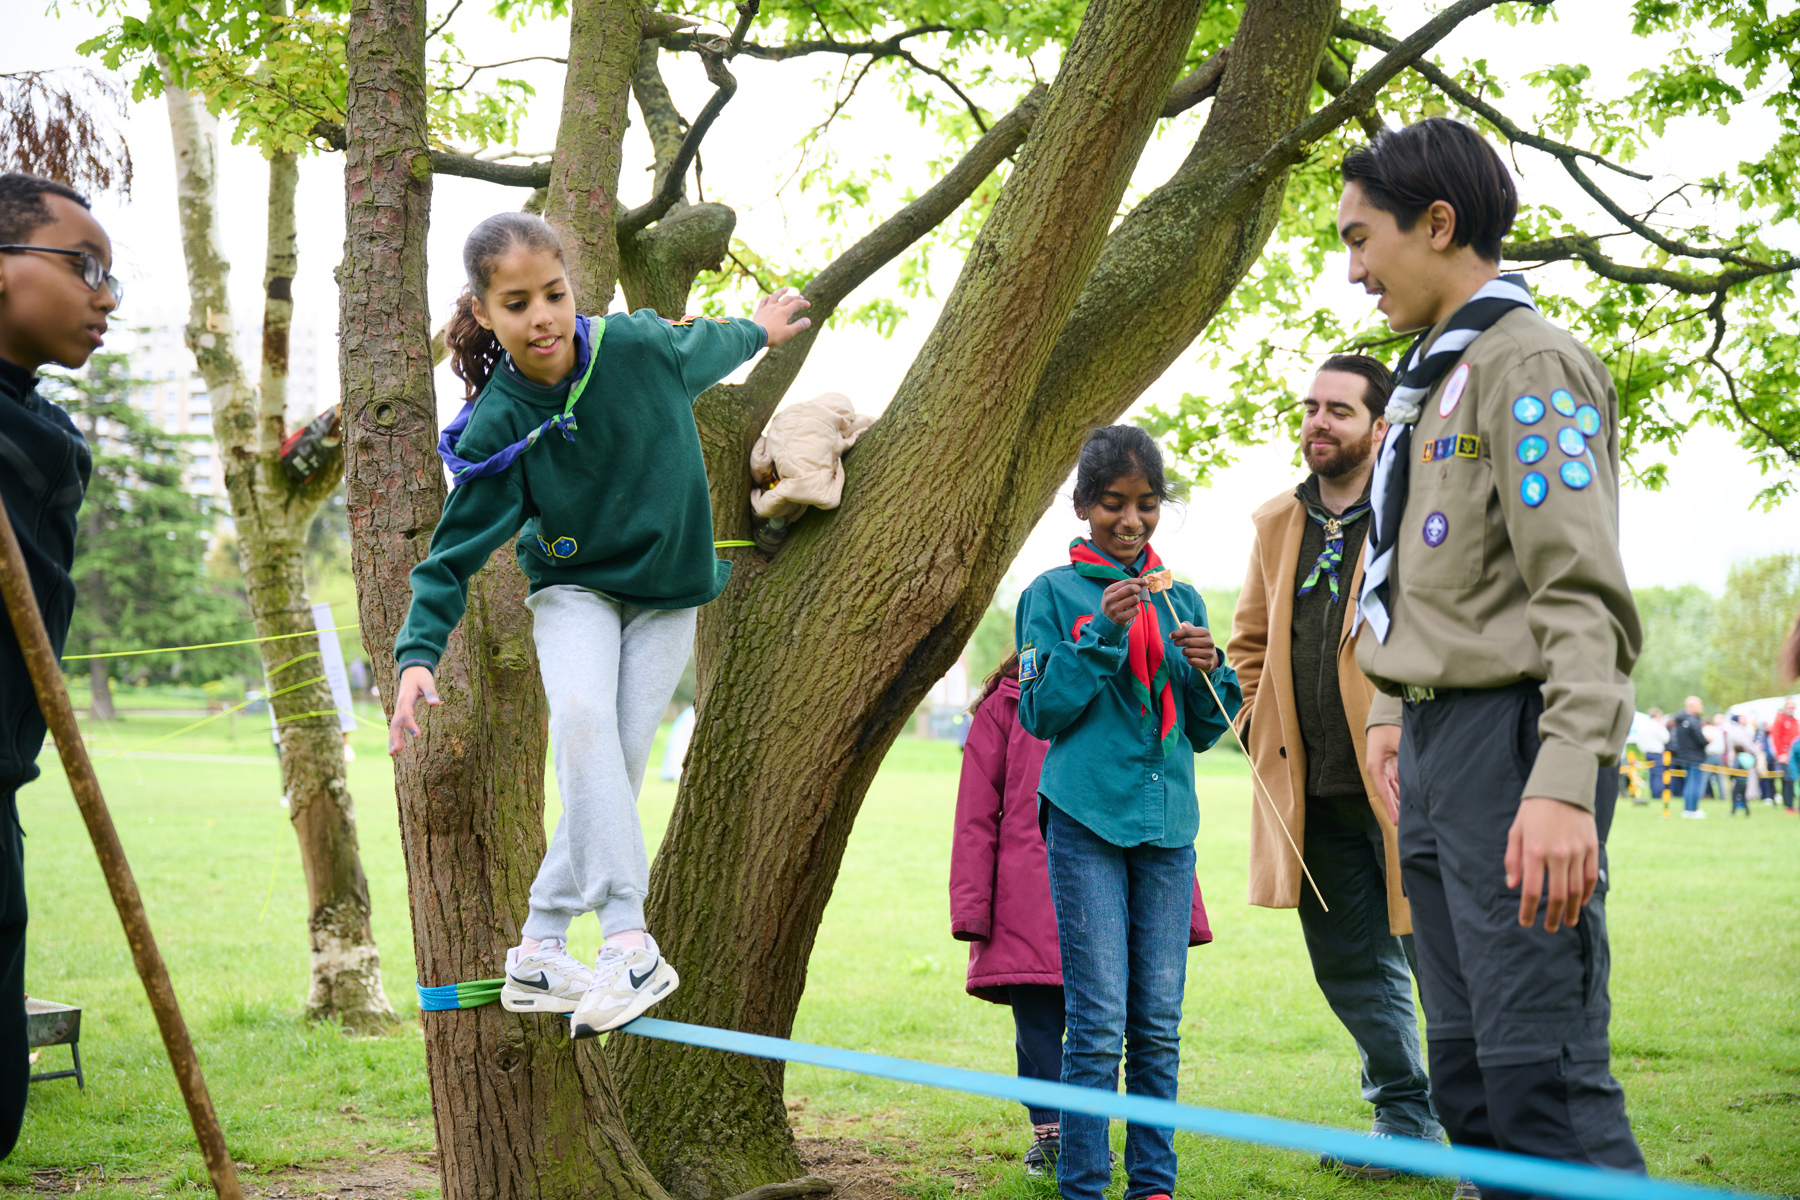 A Cub is standing on a blue rope tied to a tree and is trying to balance on it. A Scout, two volunteers and another Cub are stood next to the rope as she stands on it.